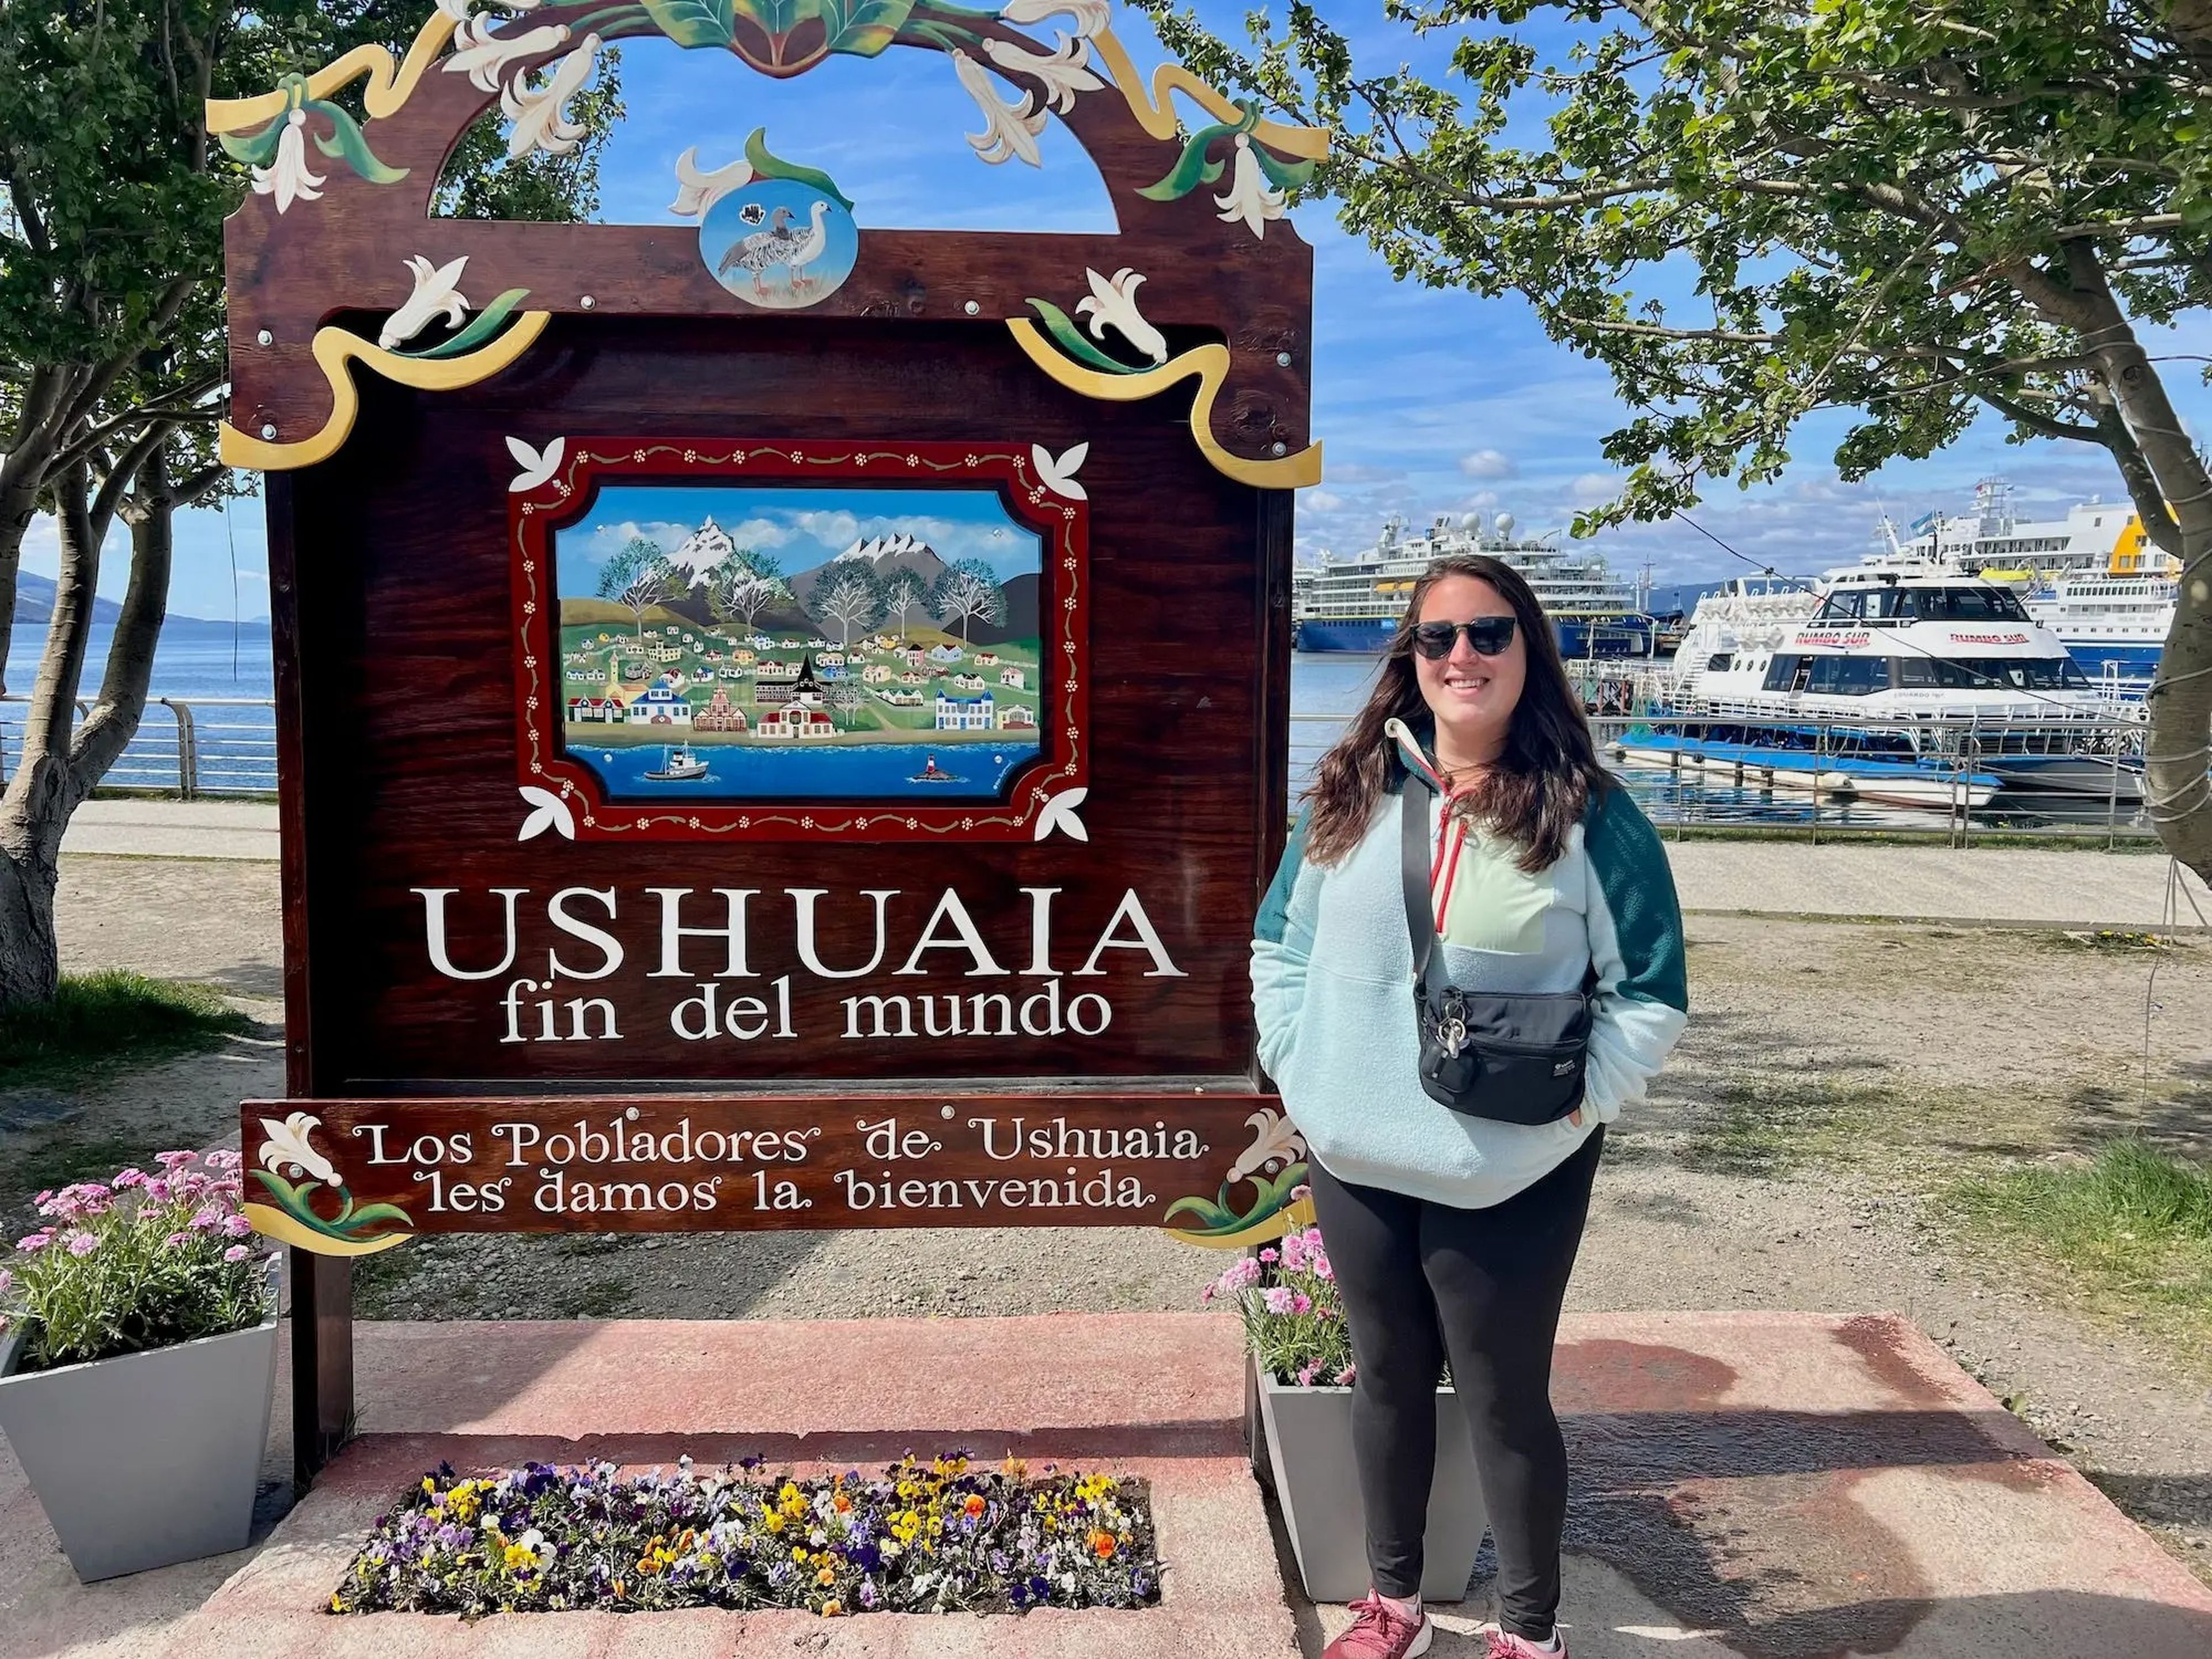 Standing with the "fin del mundo" sign in Ushuaia.